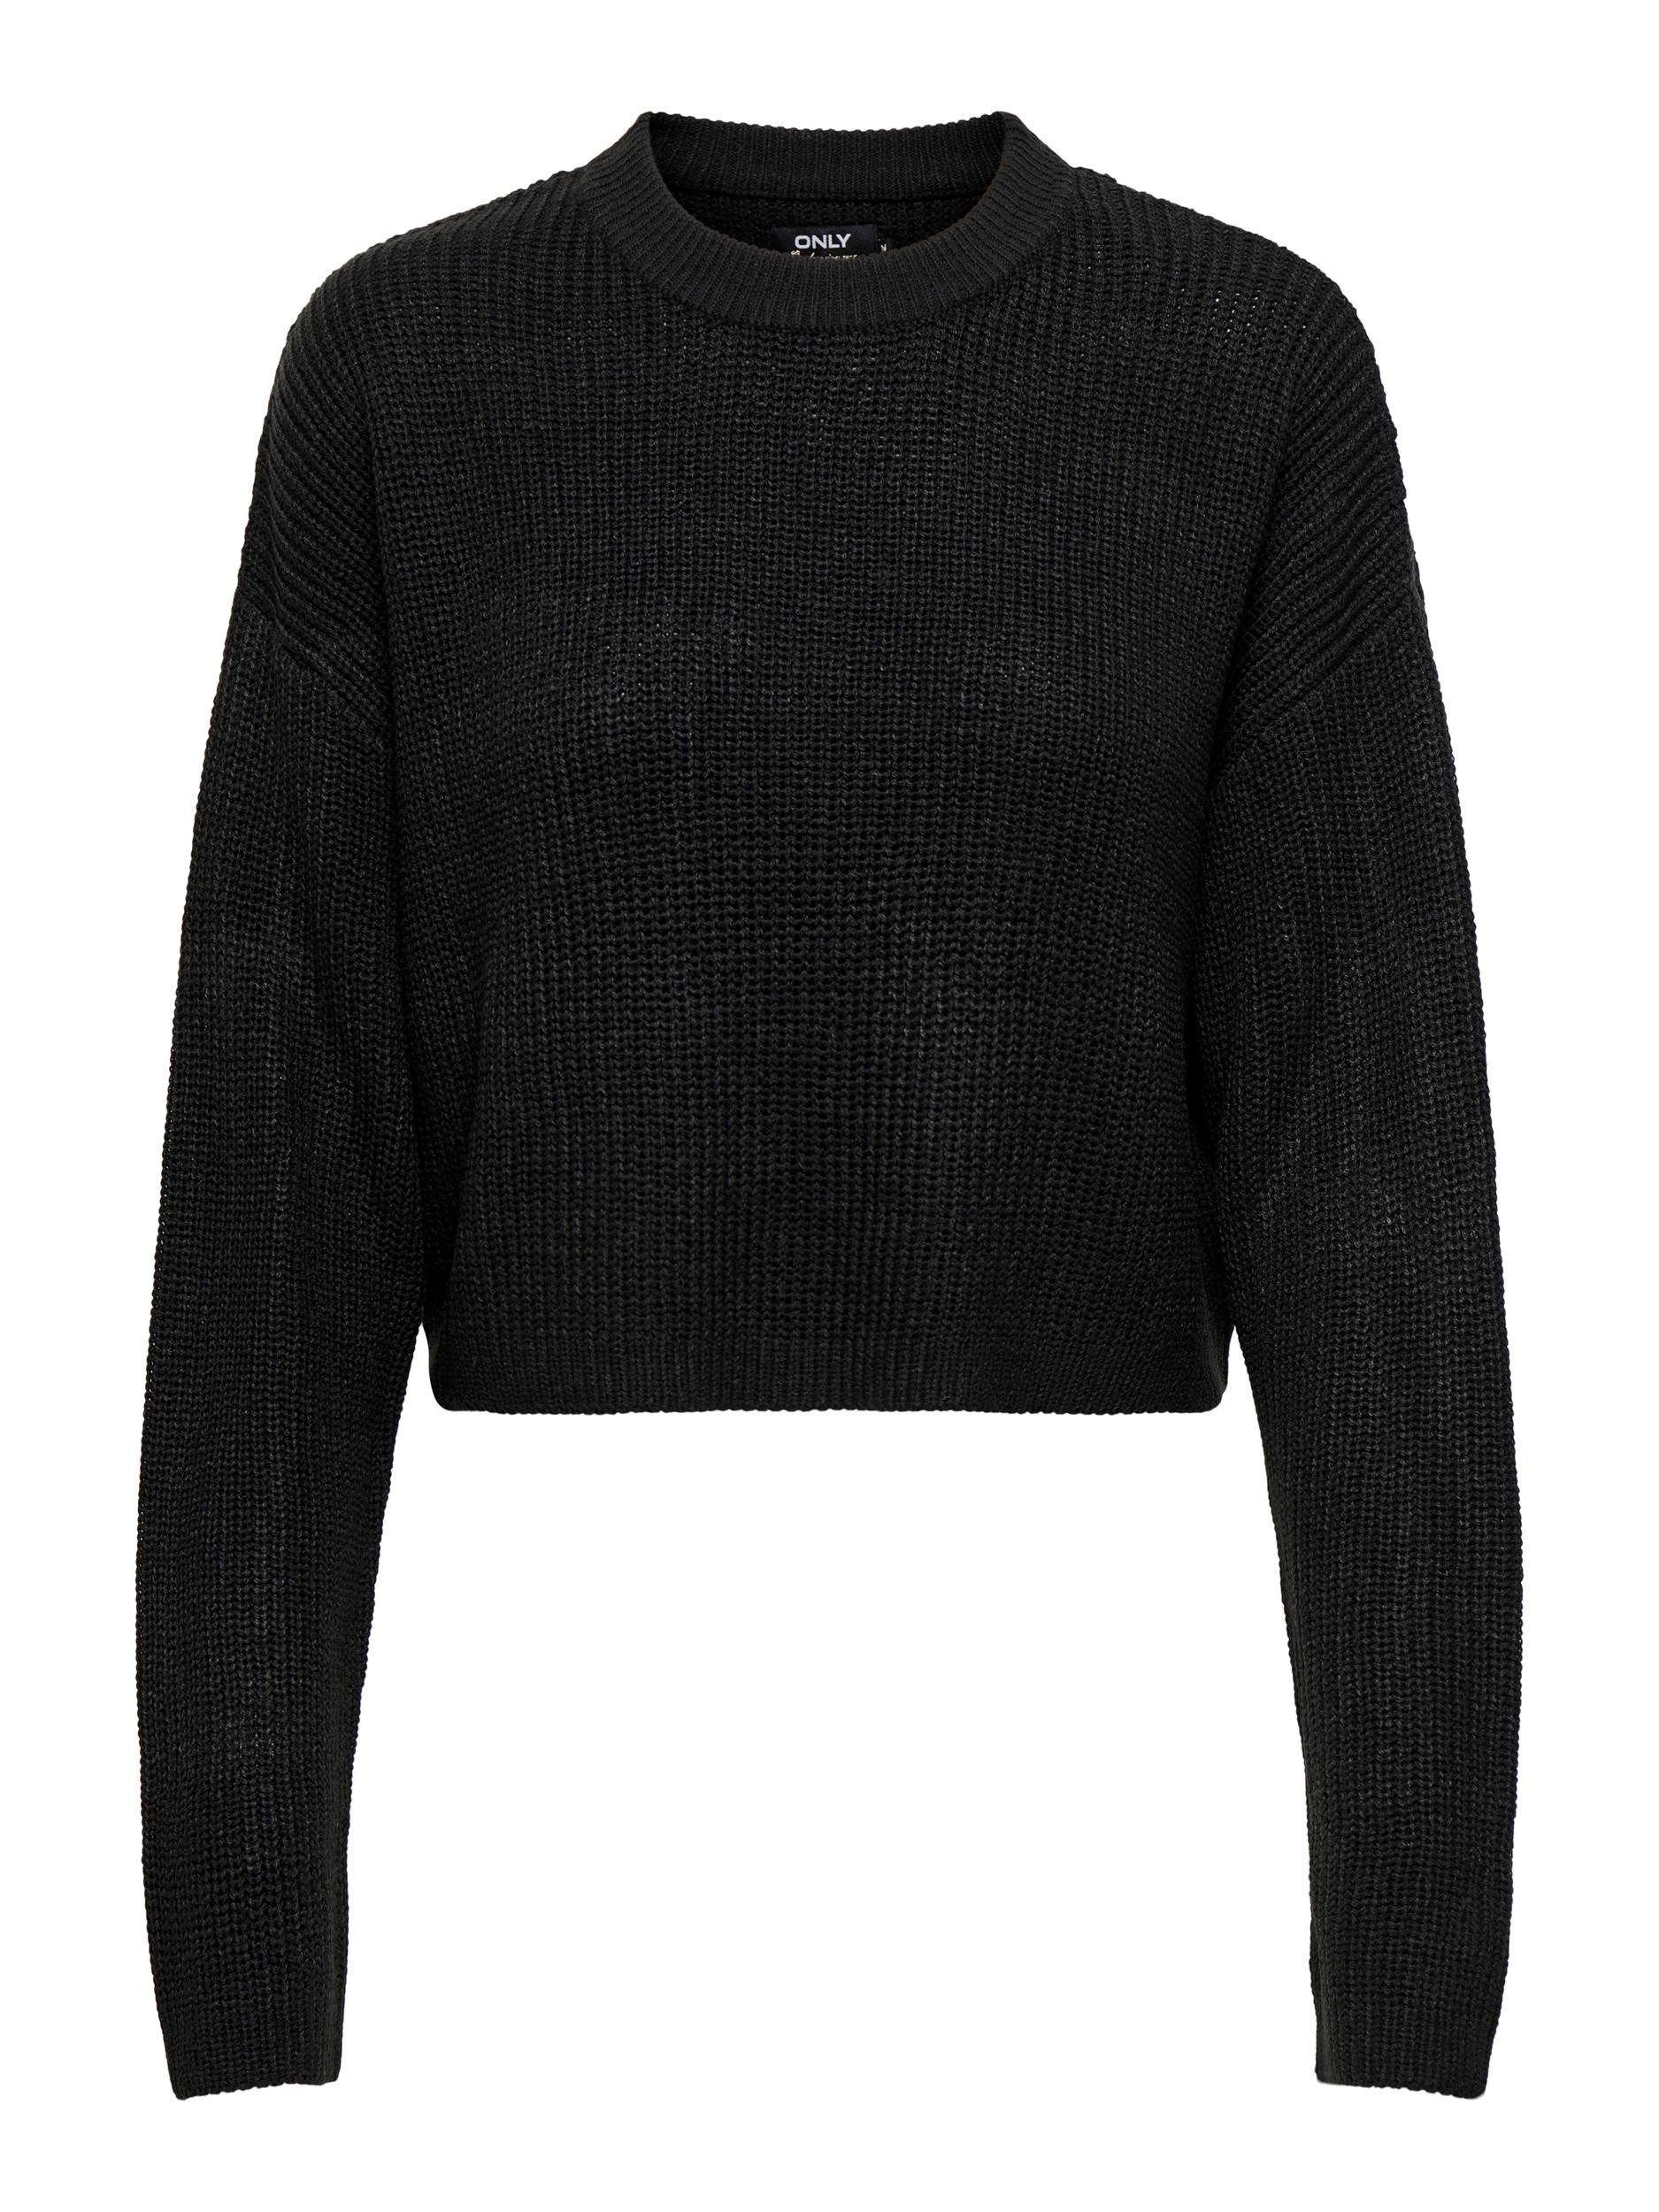 Only - Ribbed pullover, Black, large image number 0